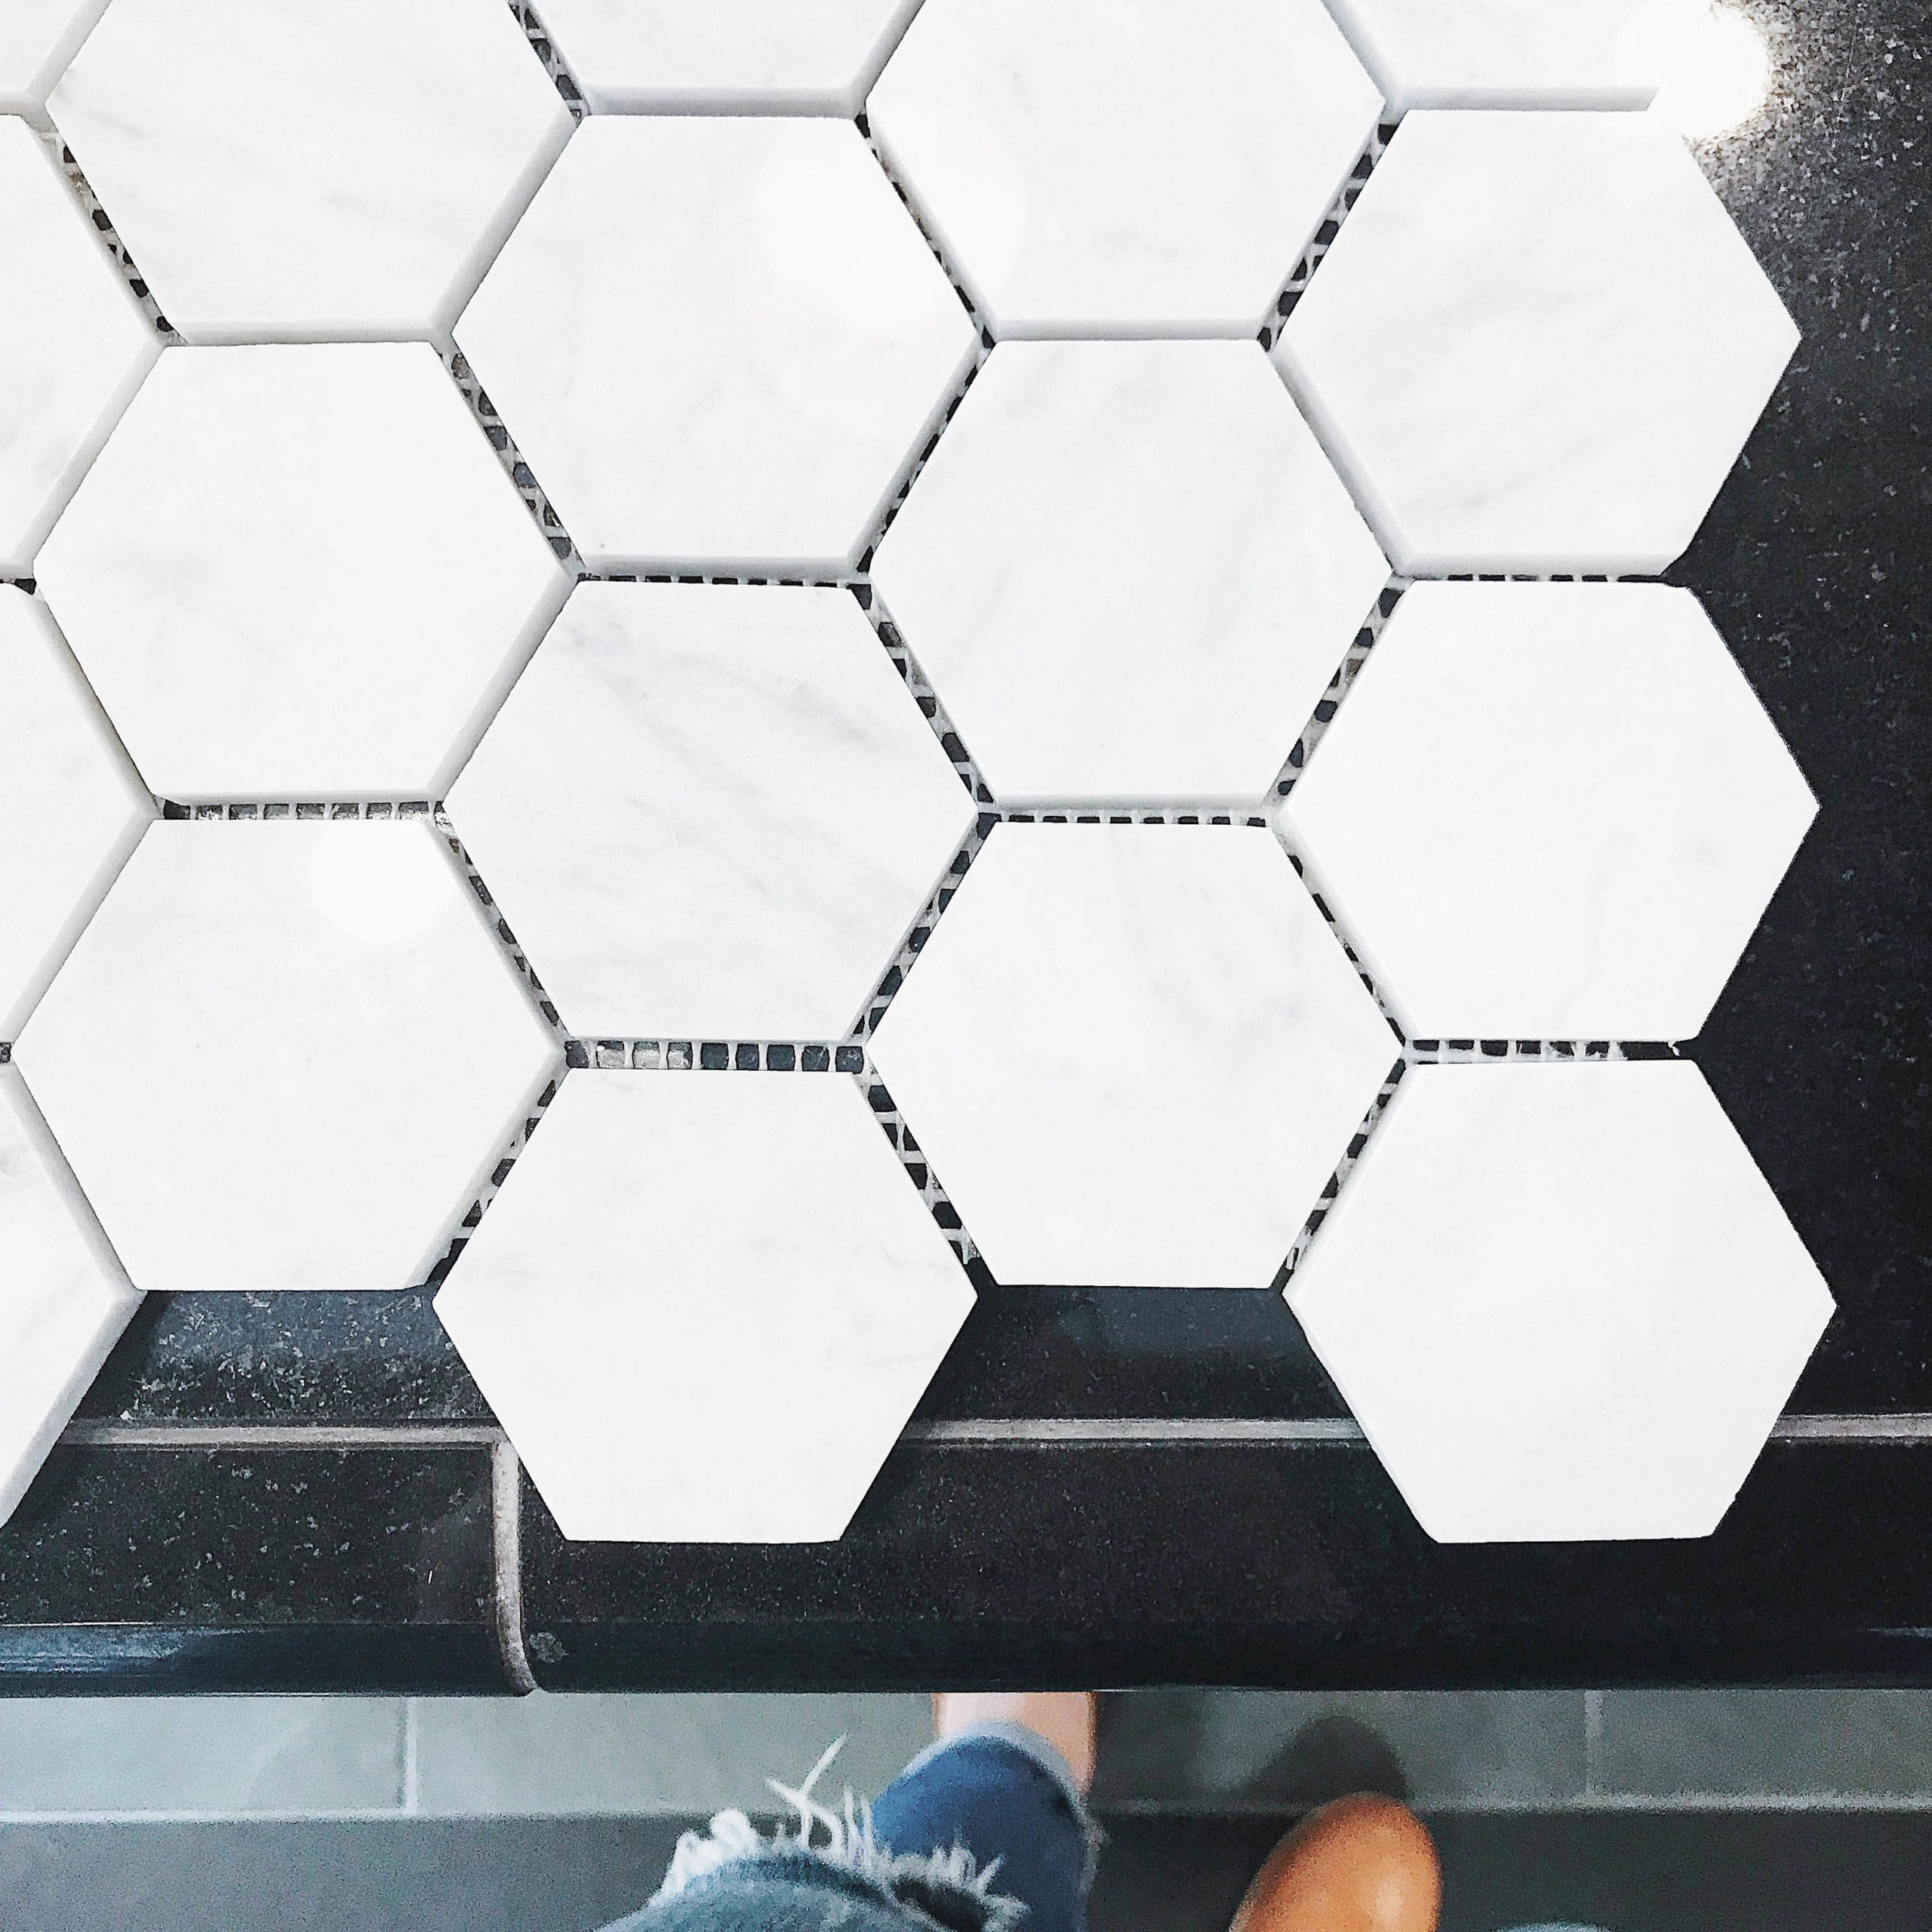 Stock image of hexagon tile to go along with article on return of investment on $80,000 renovations for a Manly, Australia unit